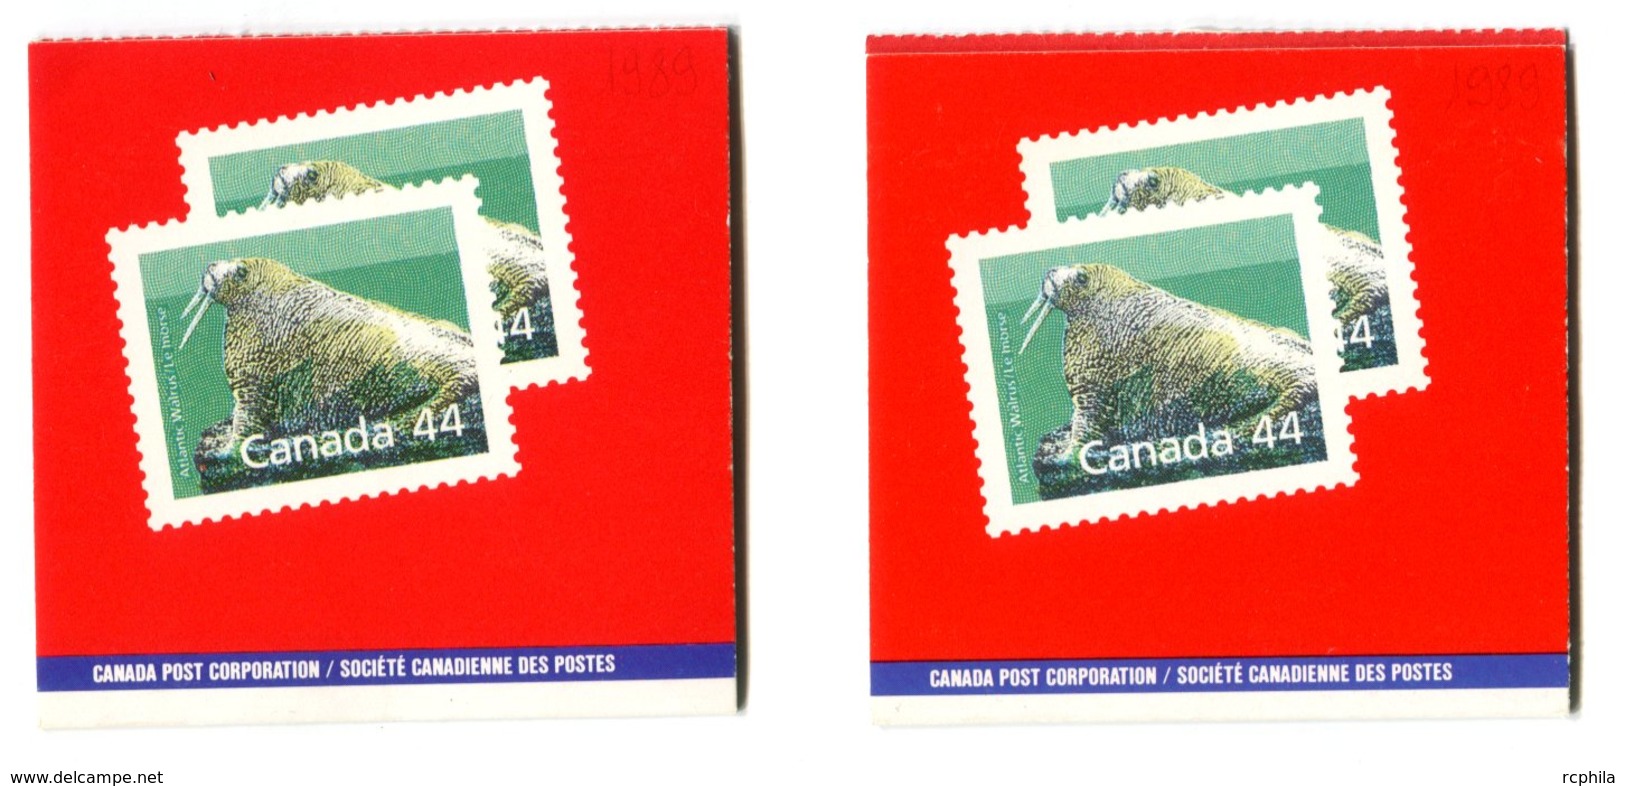 RC 16592 CANADA BK104 - 44c WALRUS ISSUE 2 CARNETS BOOKLETS MNH NEUF ** - Full Booklets